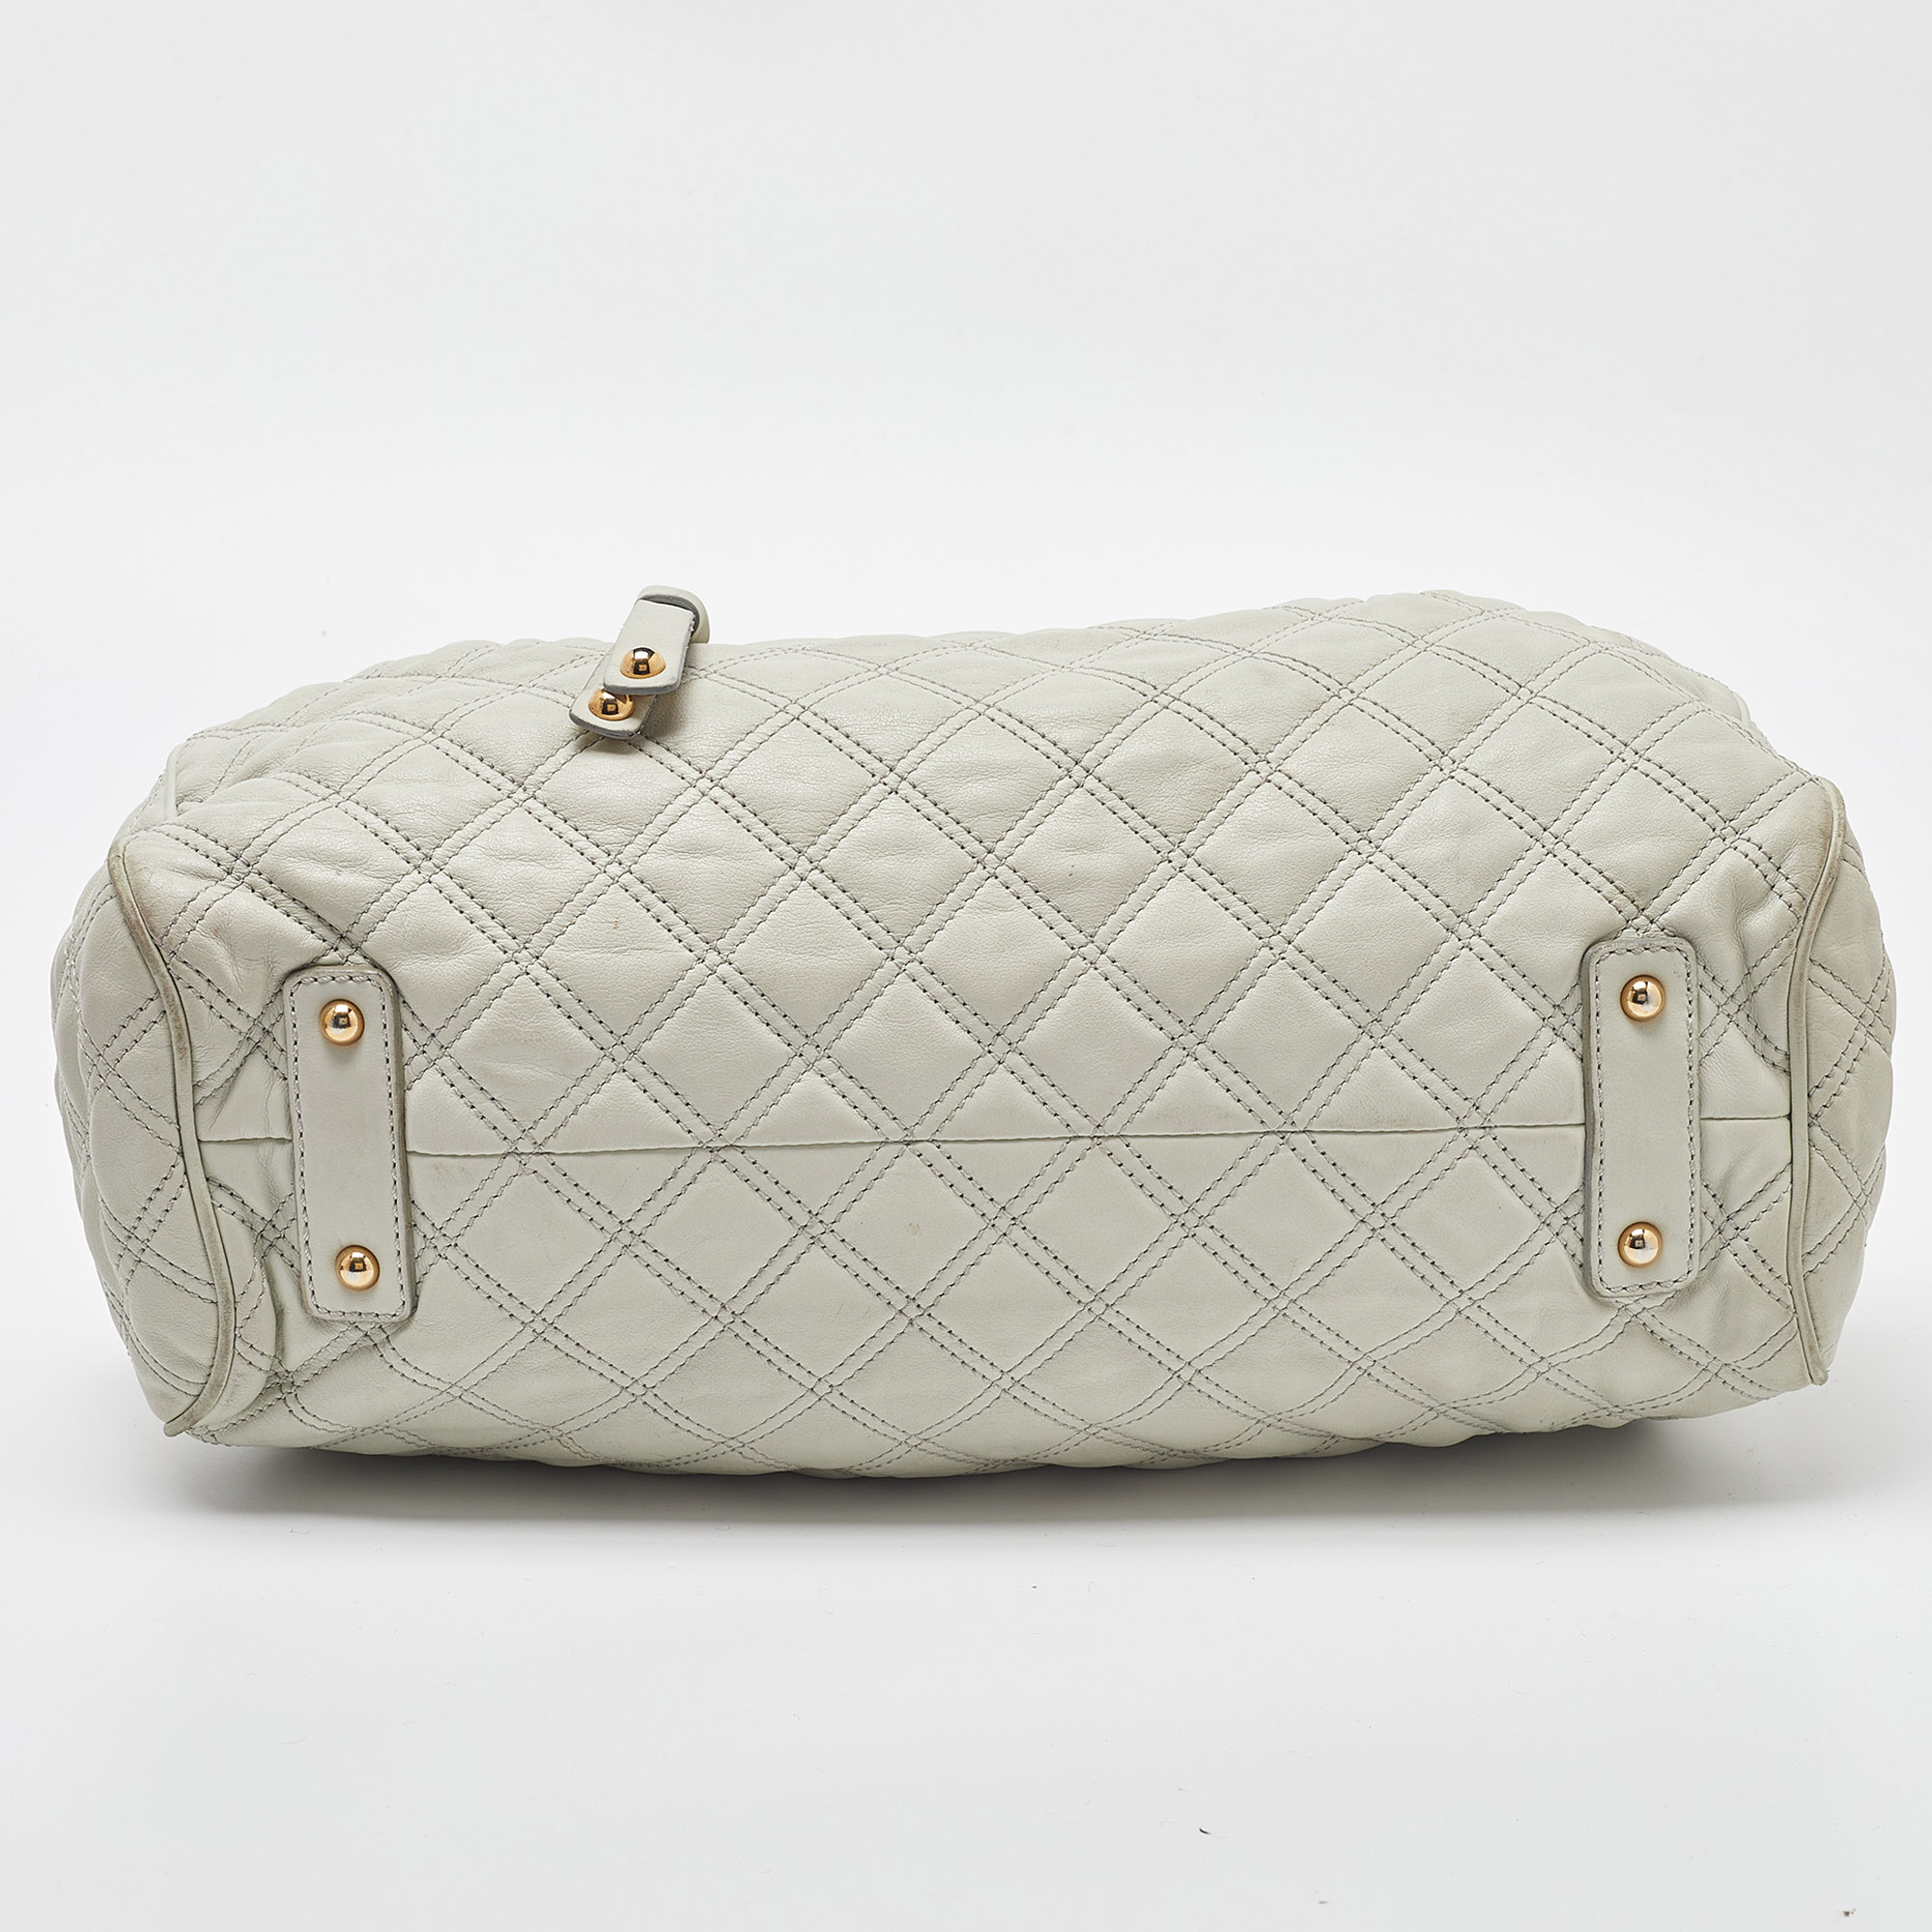 Marc Jacobs Ice Blue Quilted Leather Stam Satchel